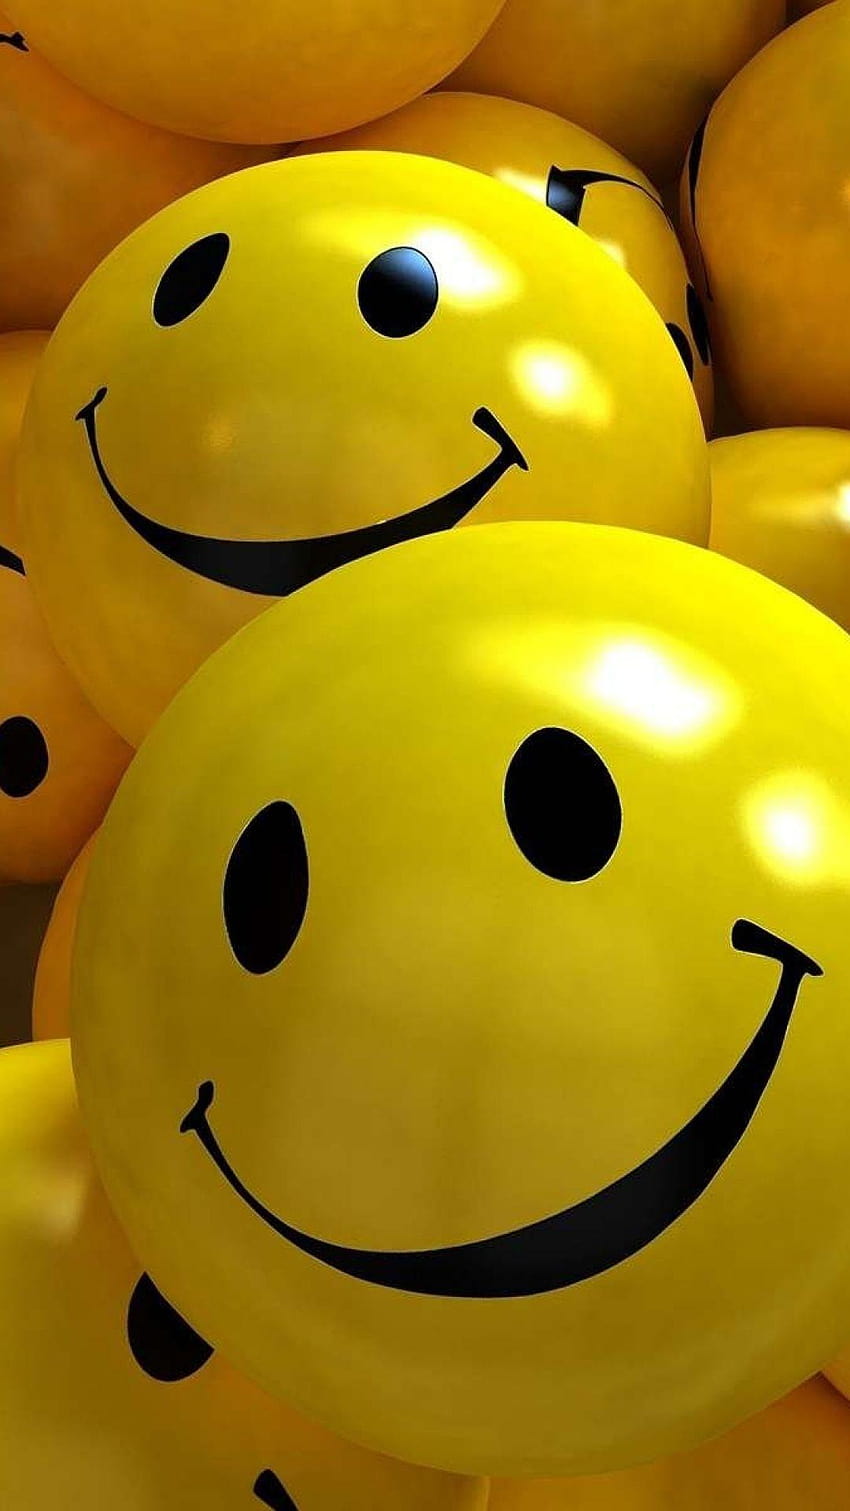 3D Yellow Smile Balls, smiley for mobile HD phone wallpaper